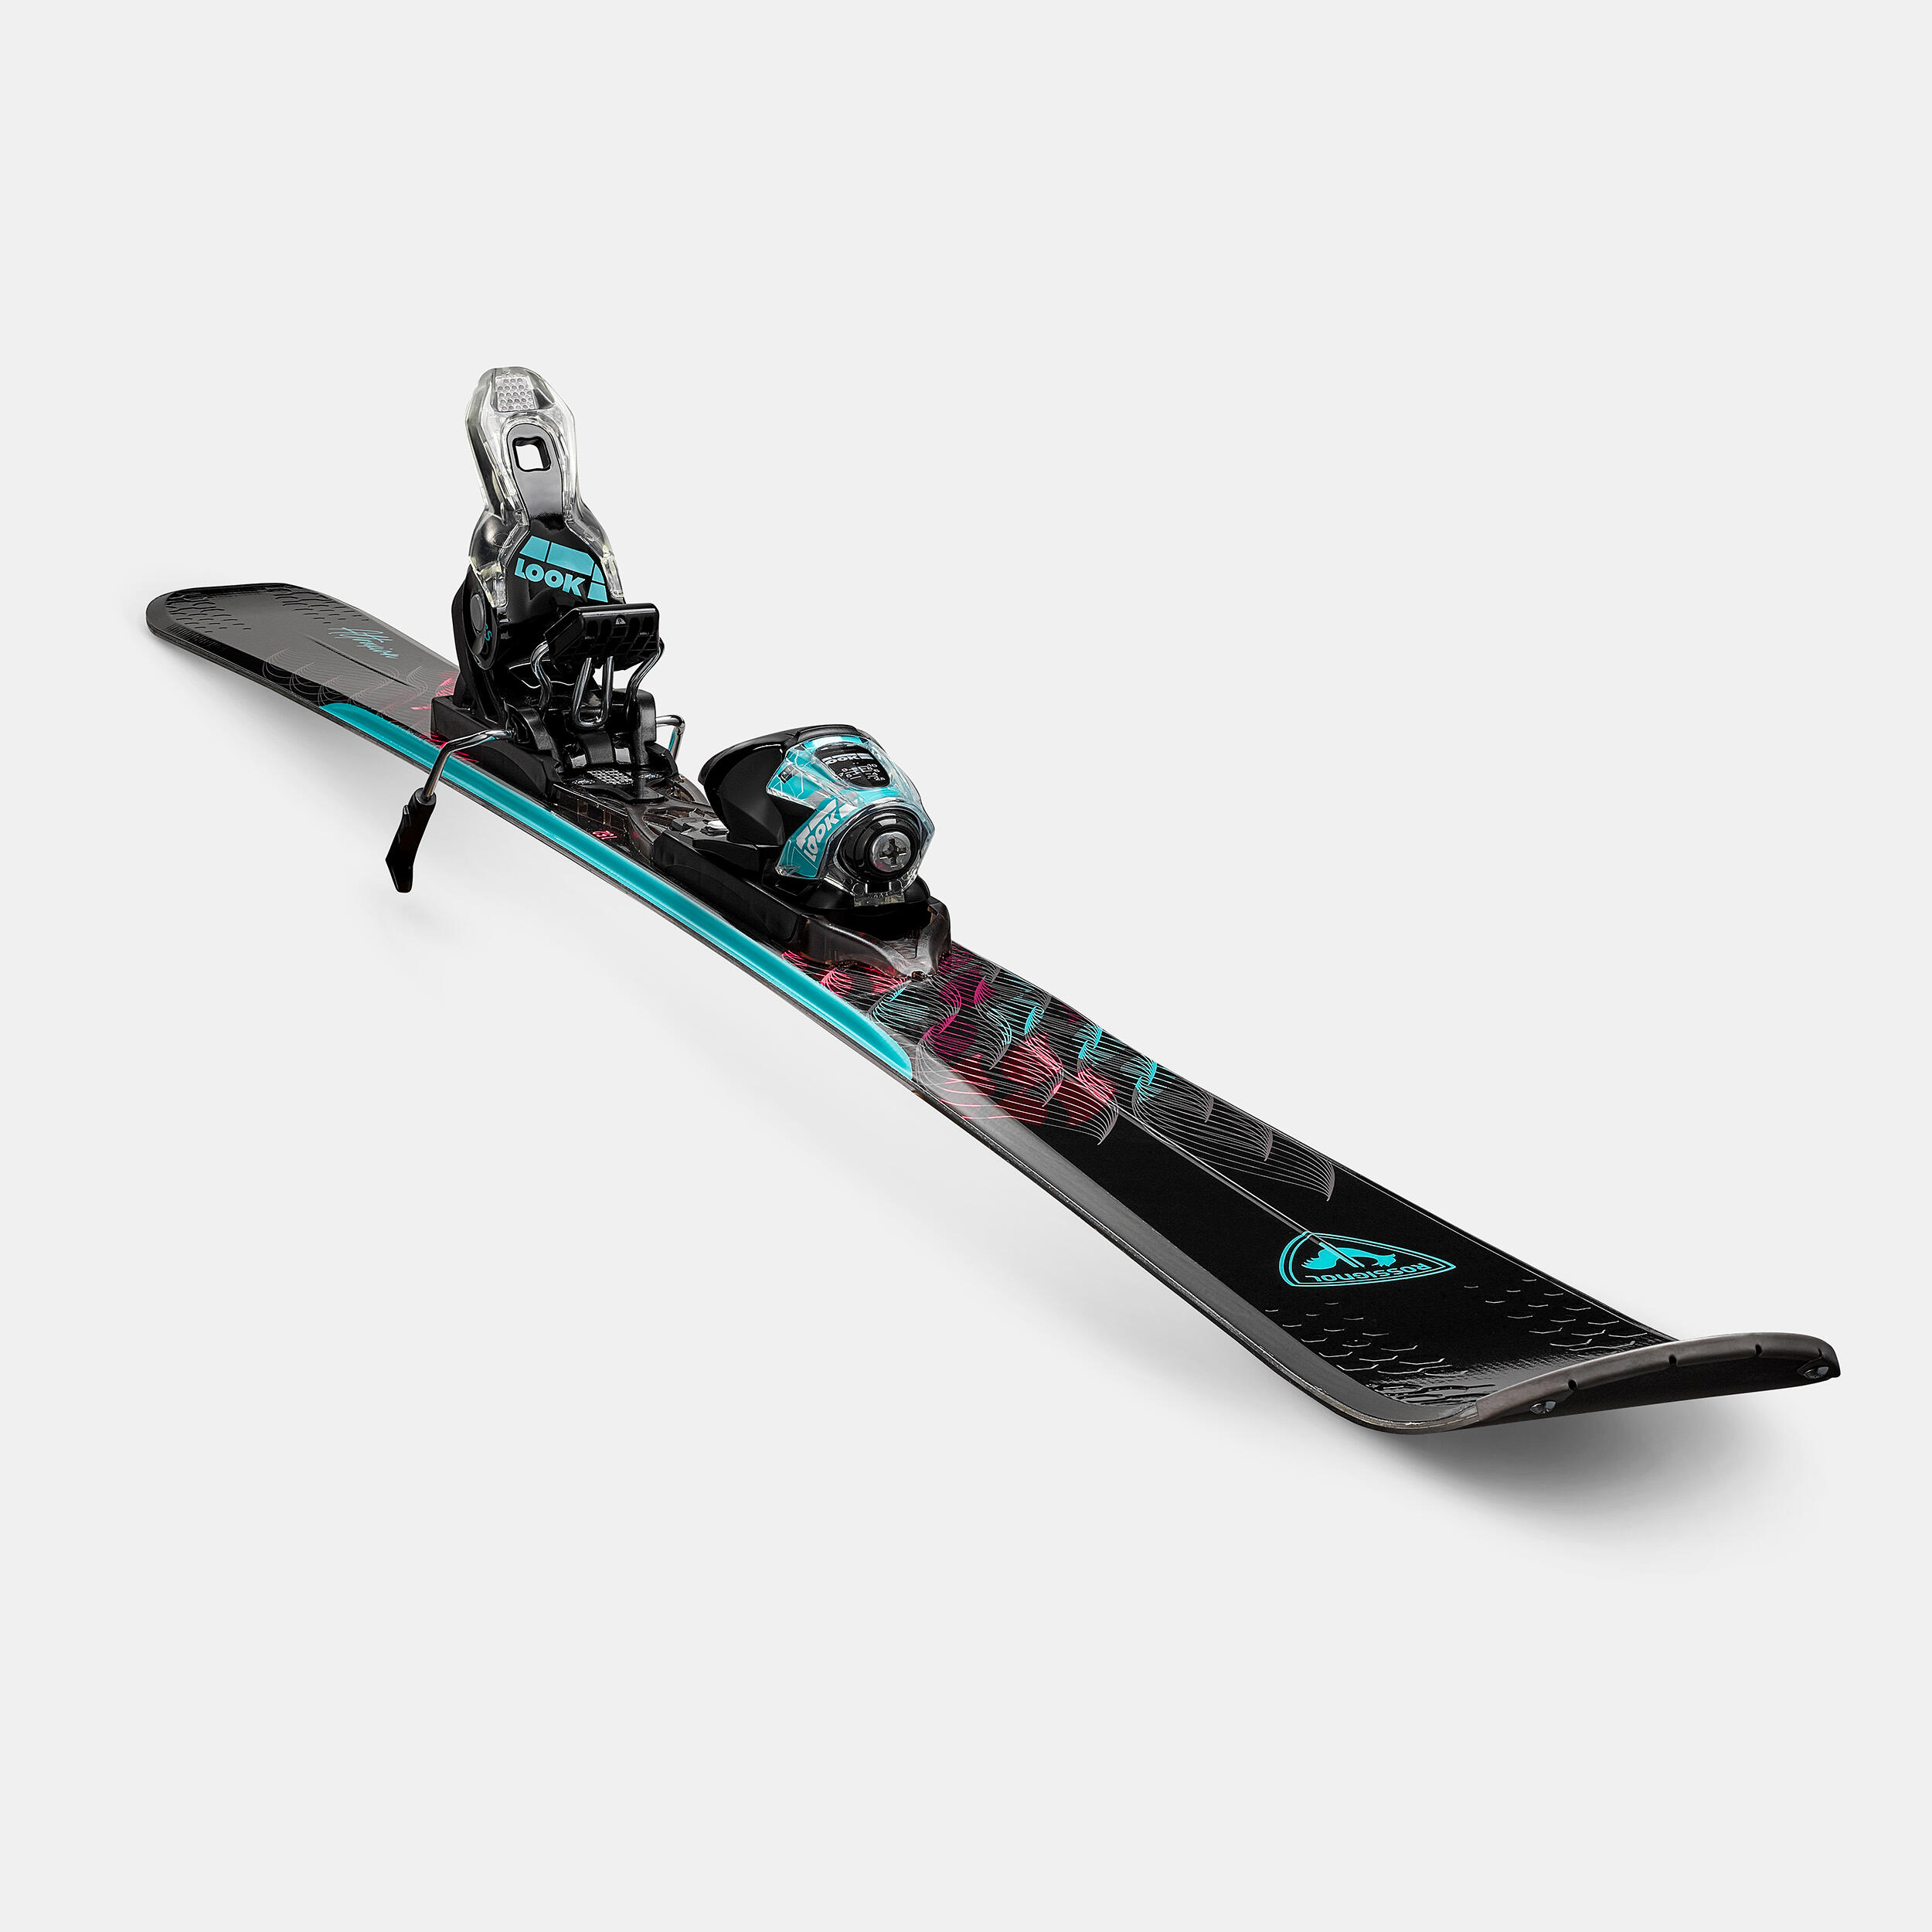 WOMEN'S DOWNHILL SKI WITH BINDINGS - ROSSIGNOL ATTRAXION  5/8